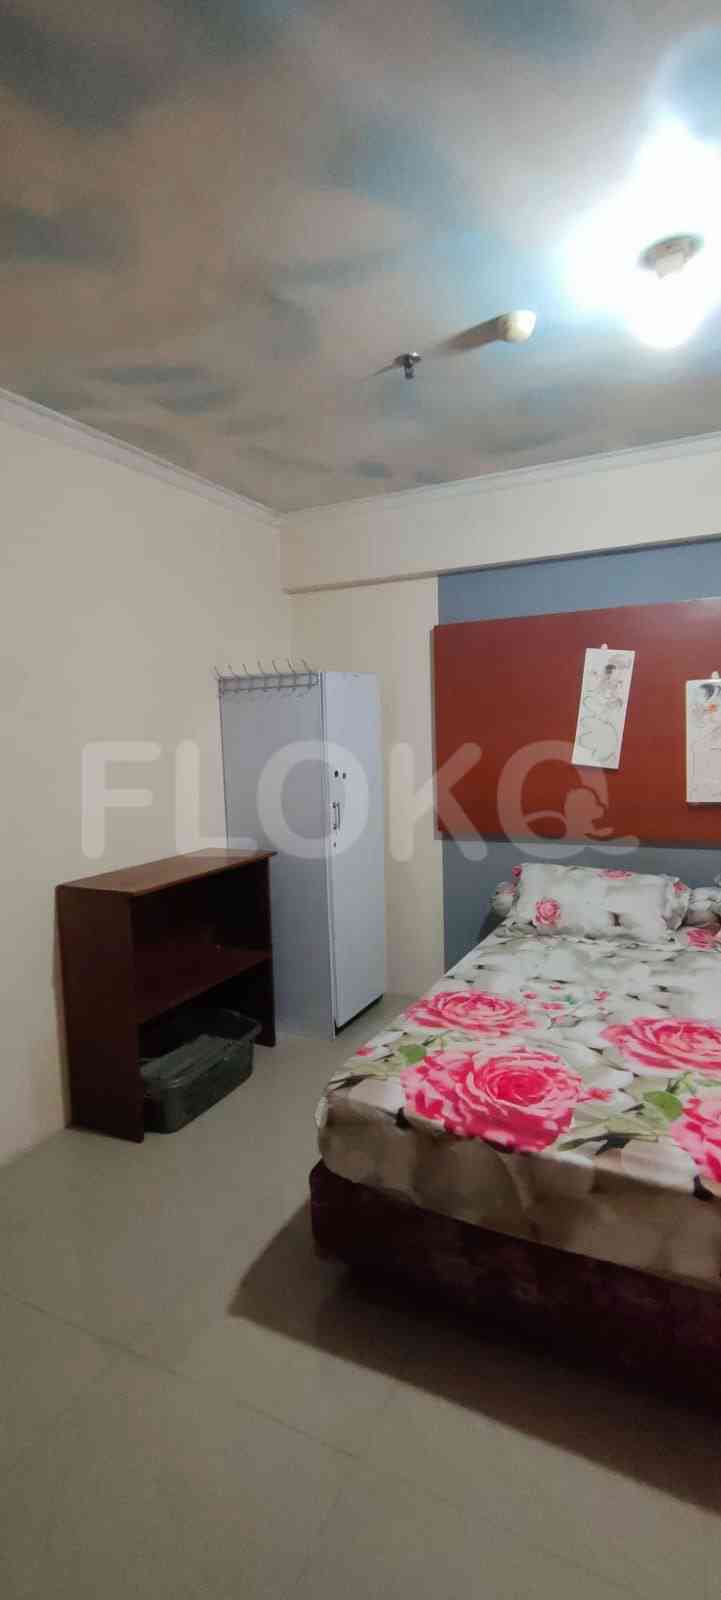 1 Bedroom on 21st Floor for Rent in Sentra Timur Residence - fcab27 3